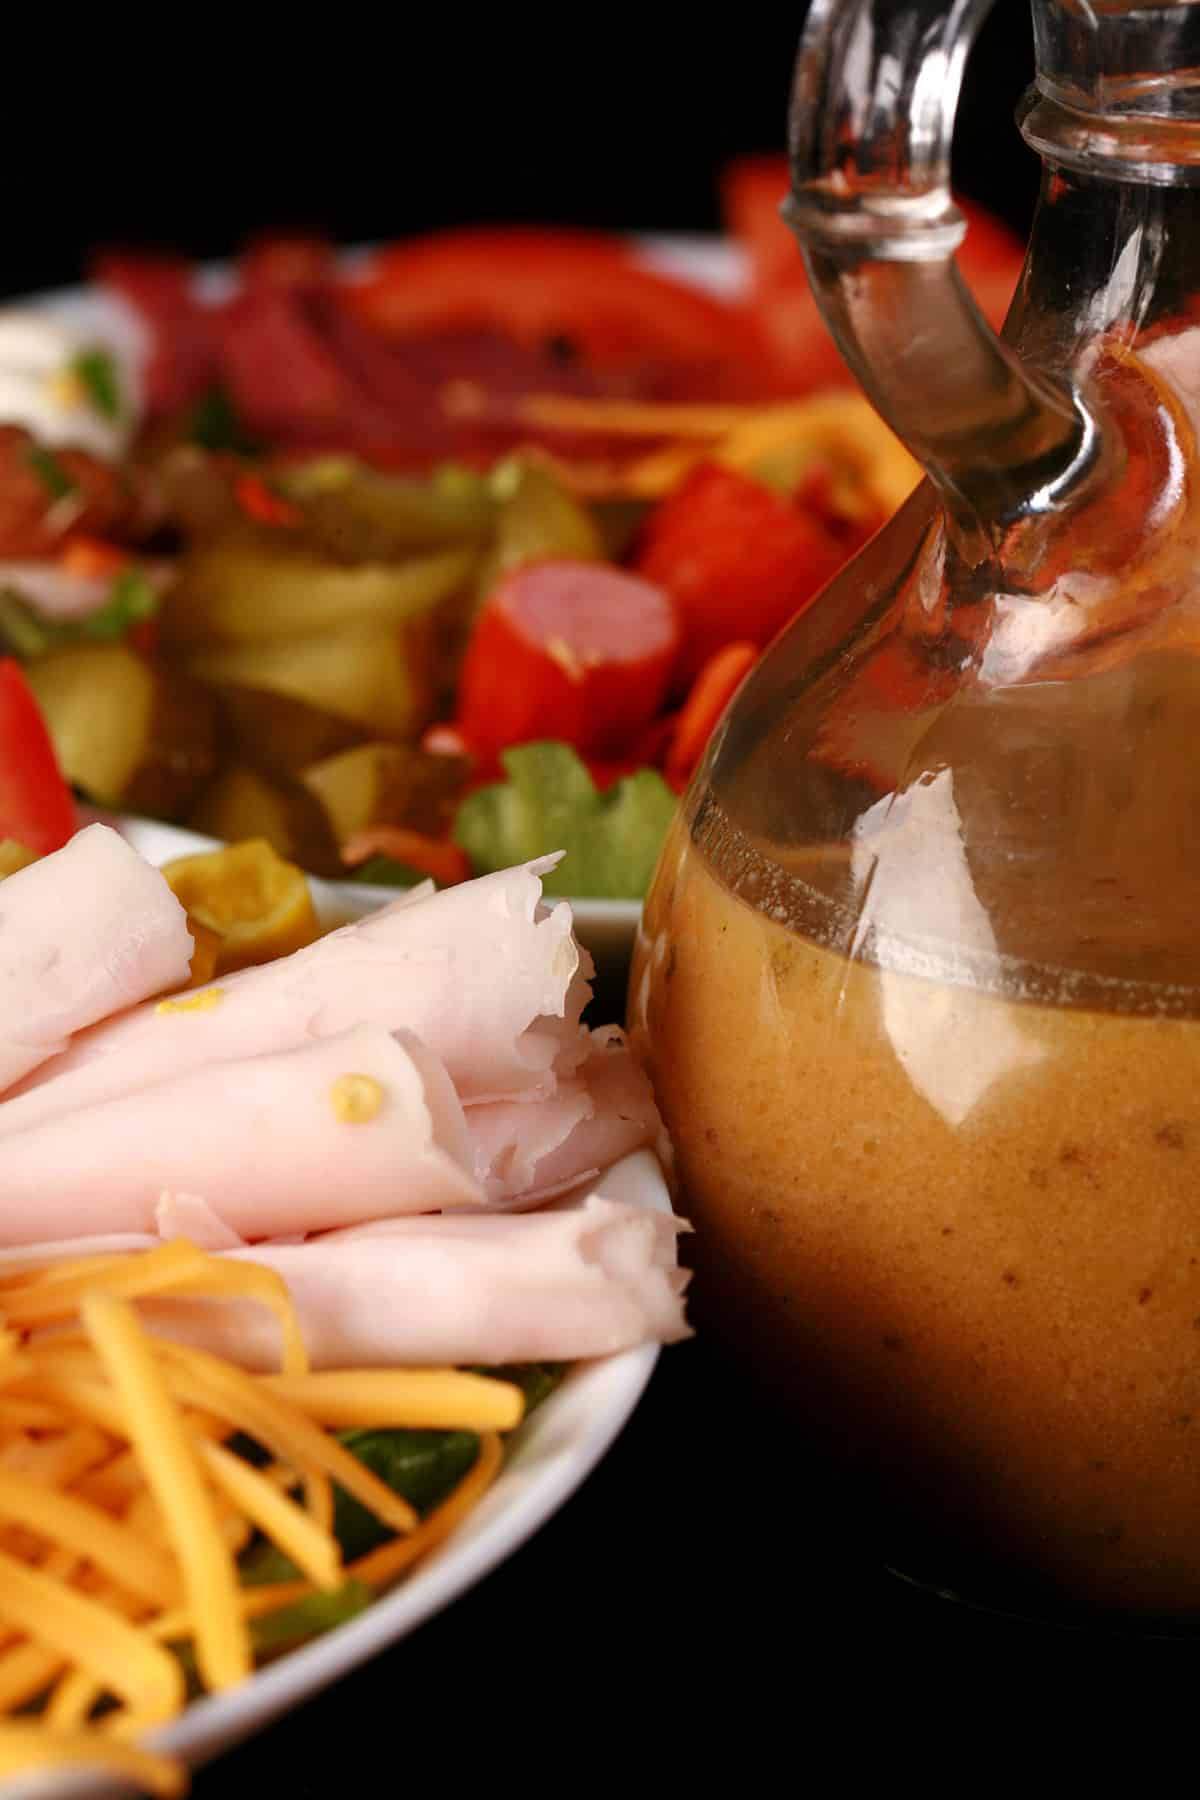 Two Italian Sub Salads with a bottle of dressing.